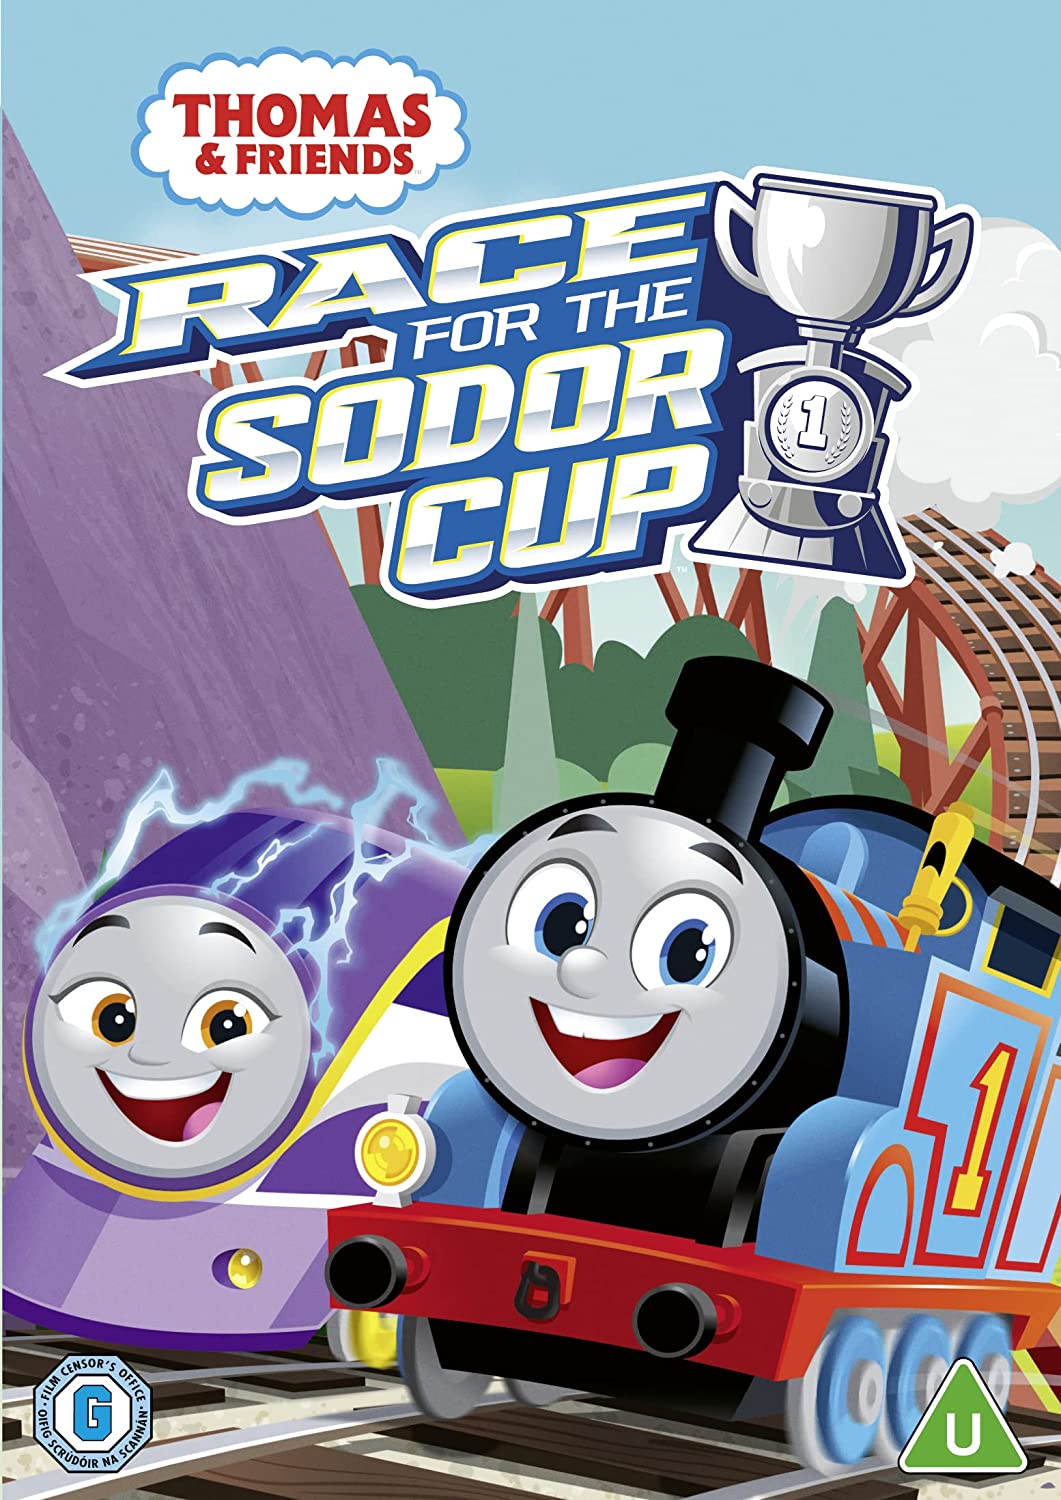 Thomas & Friends: Race for the Sodor Cup  [2021] [DVD]